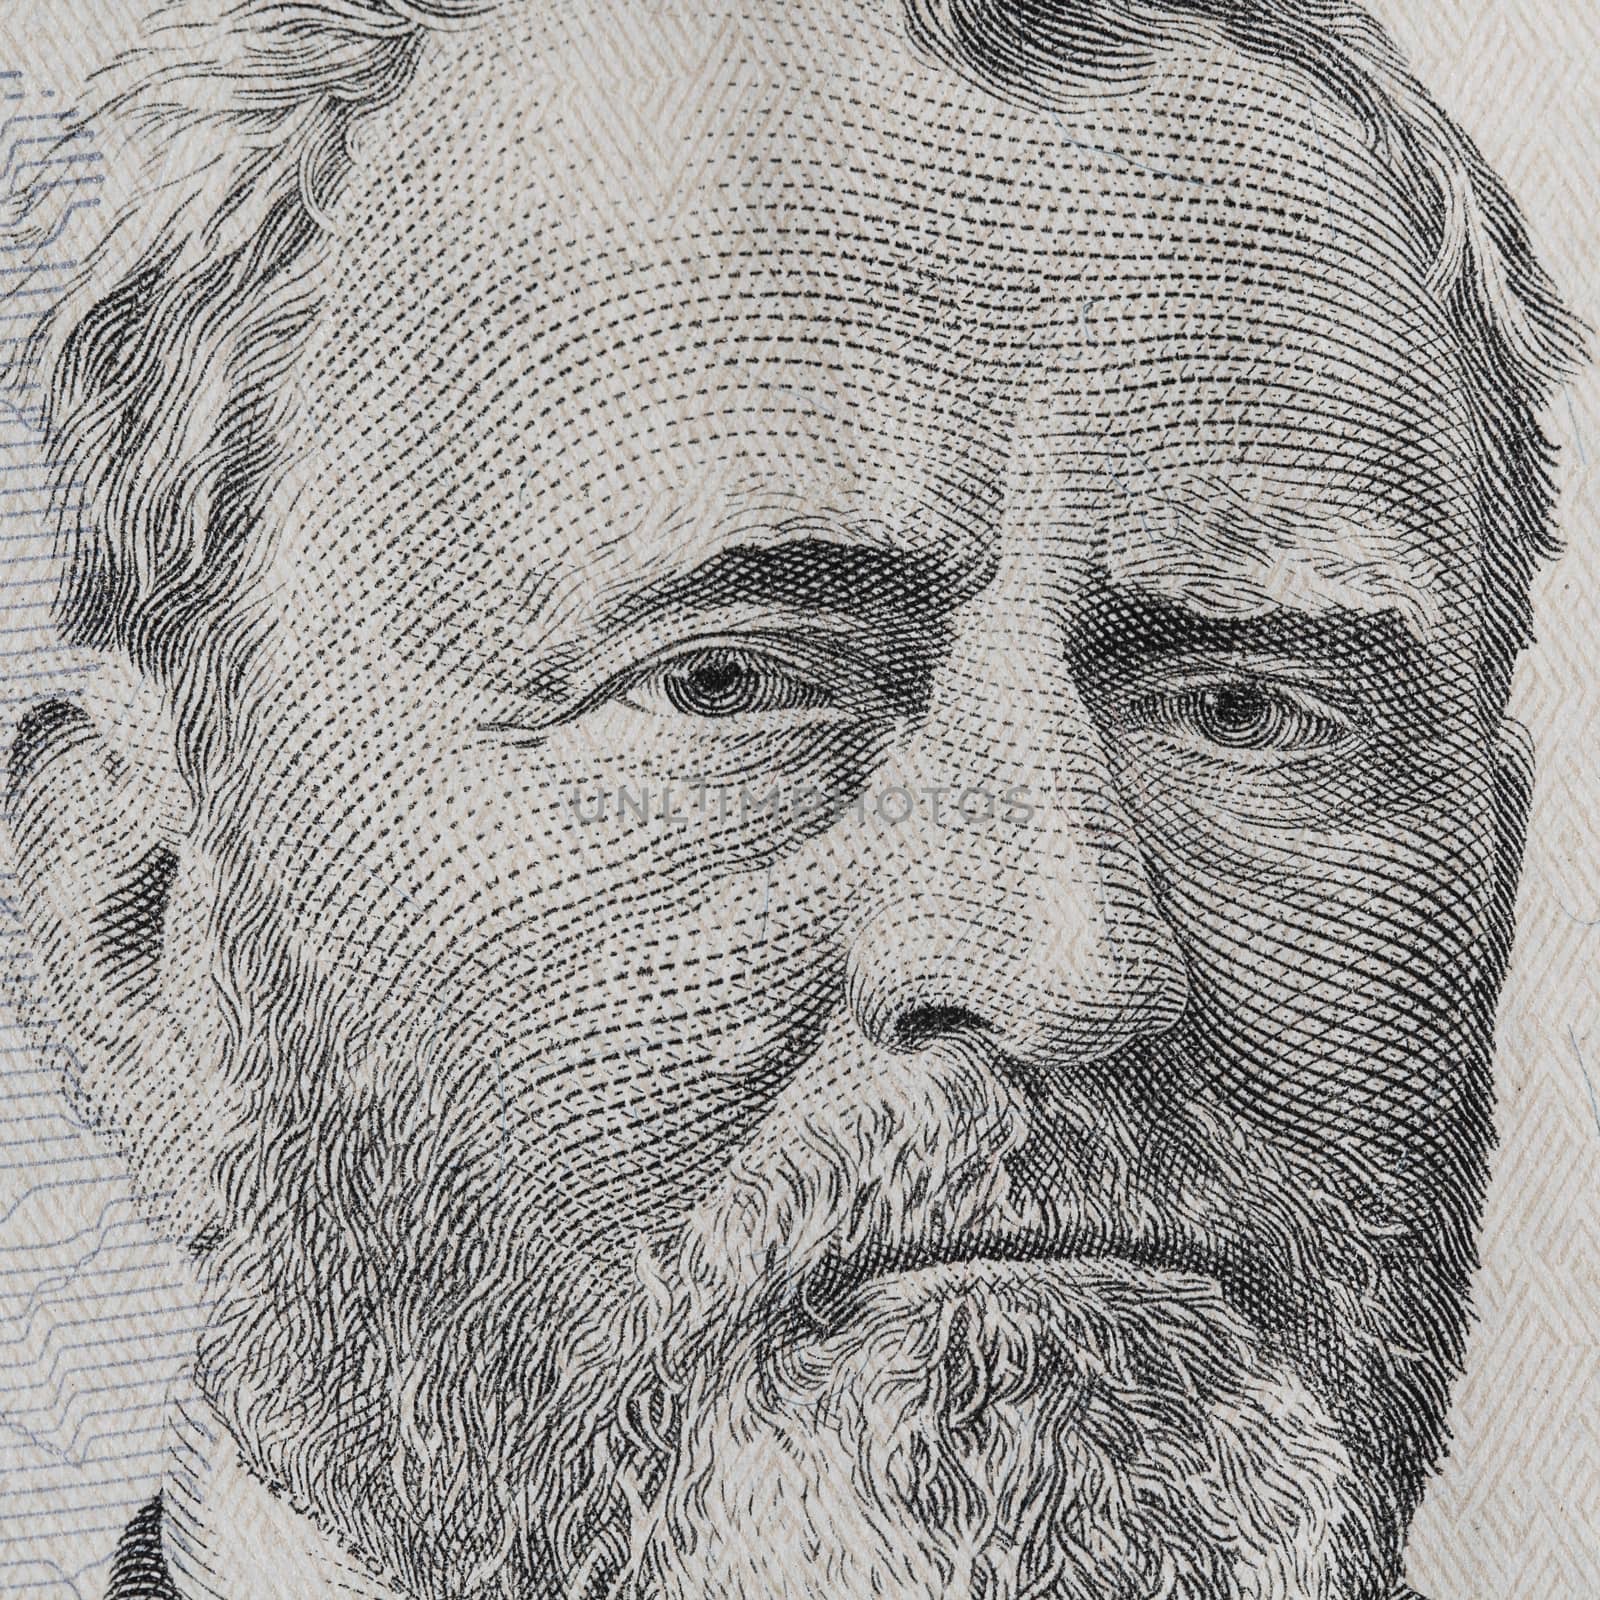 Ulysses Simpson Grant. Qualitative portrait from 50 dollars banknote.